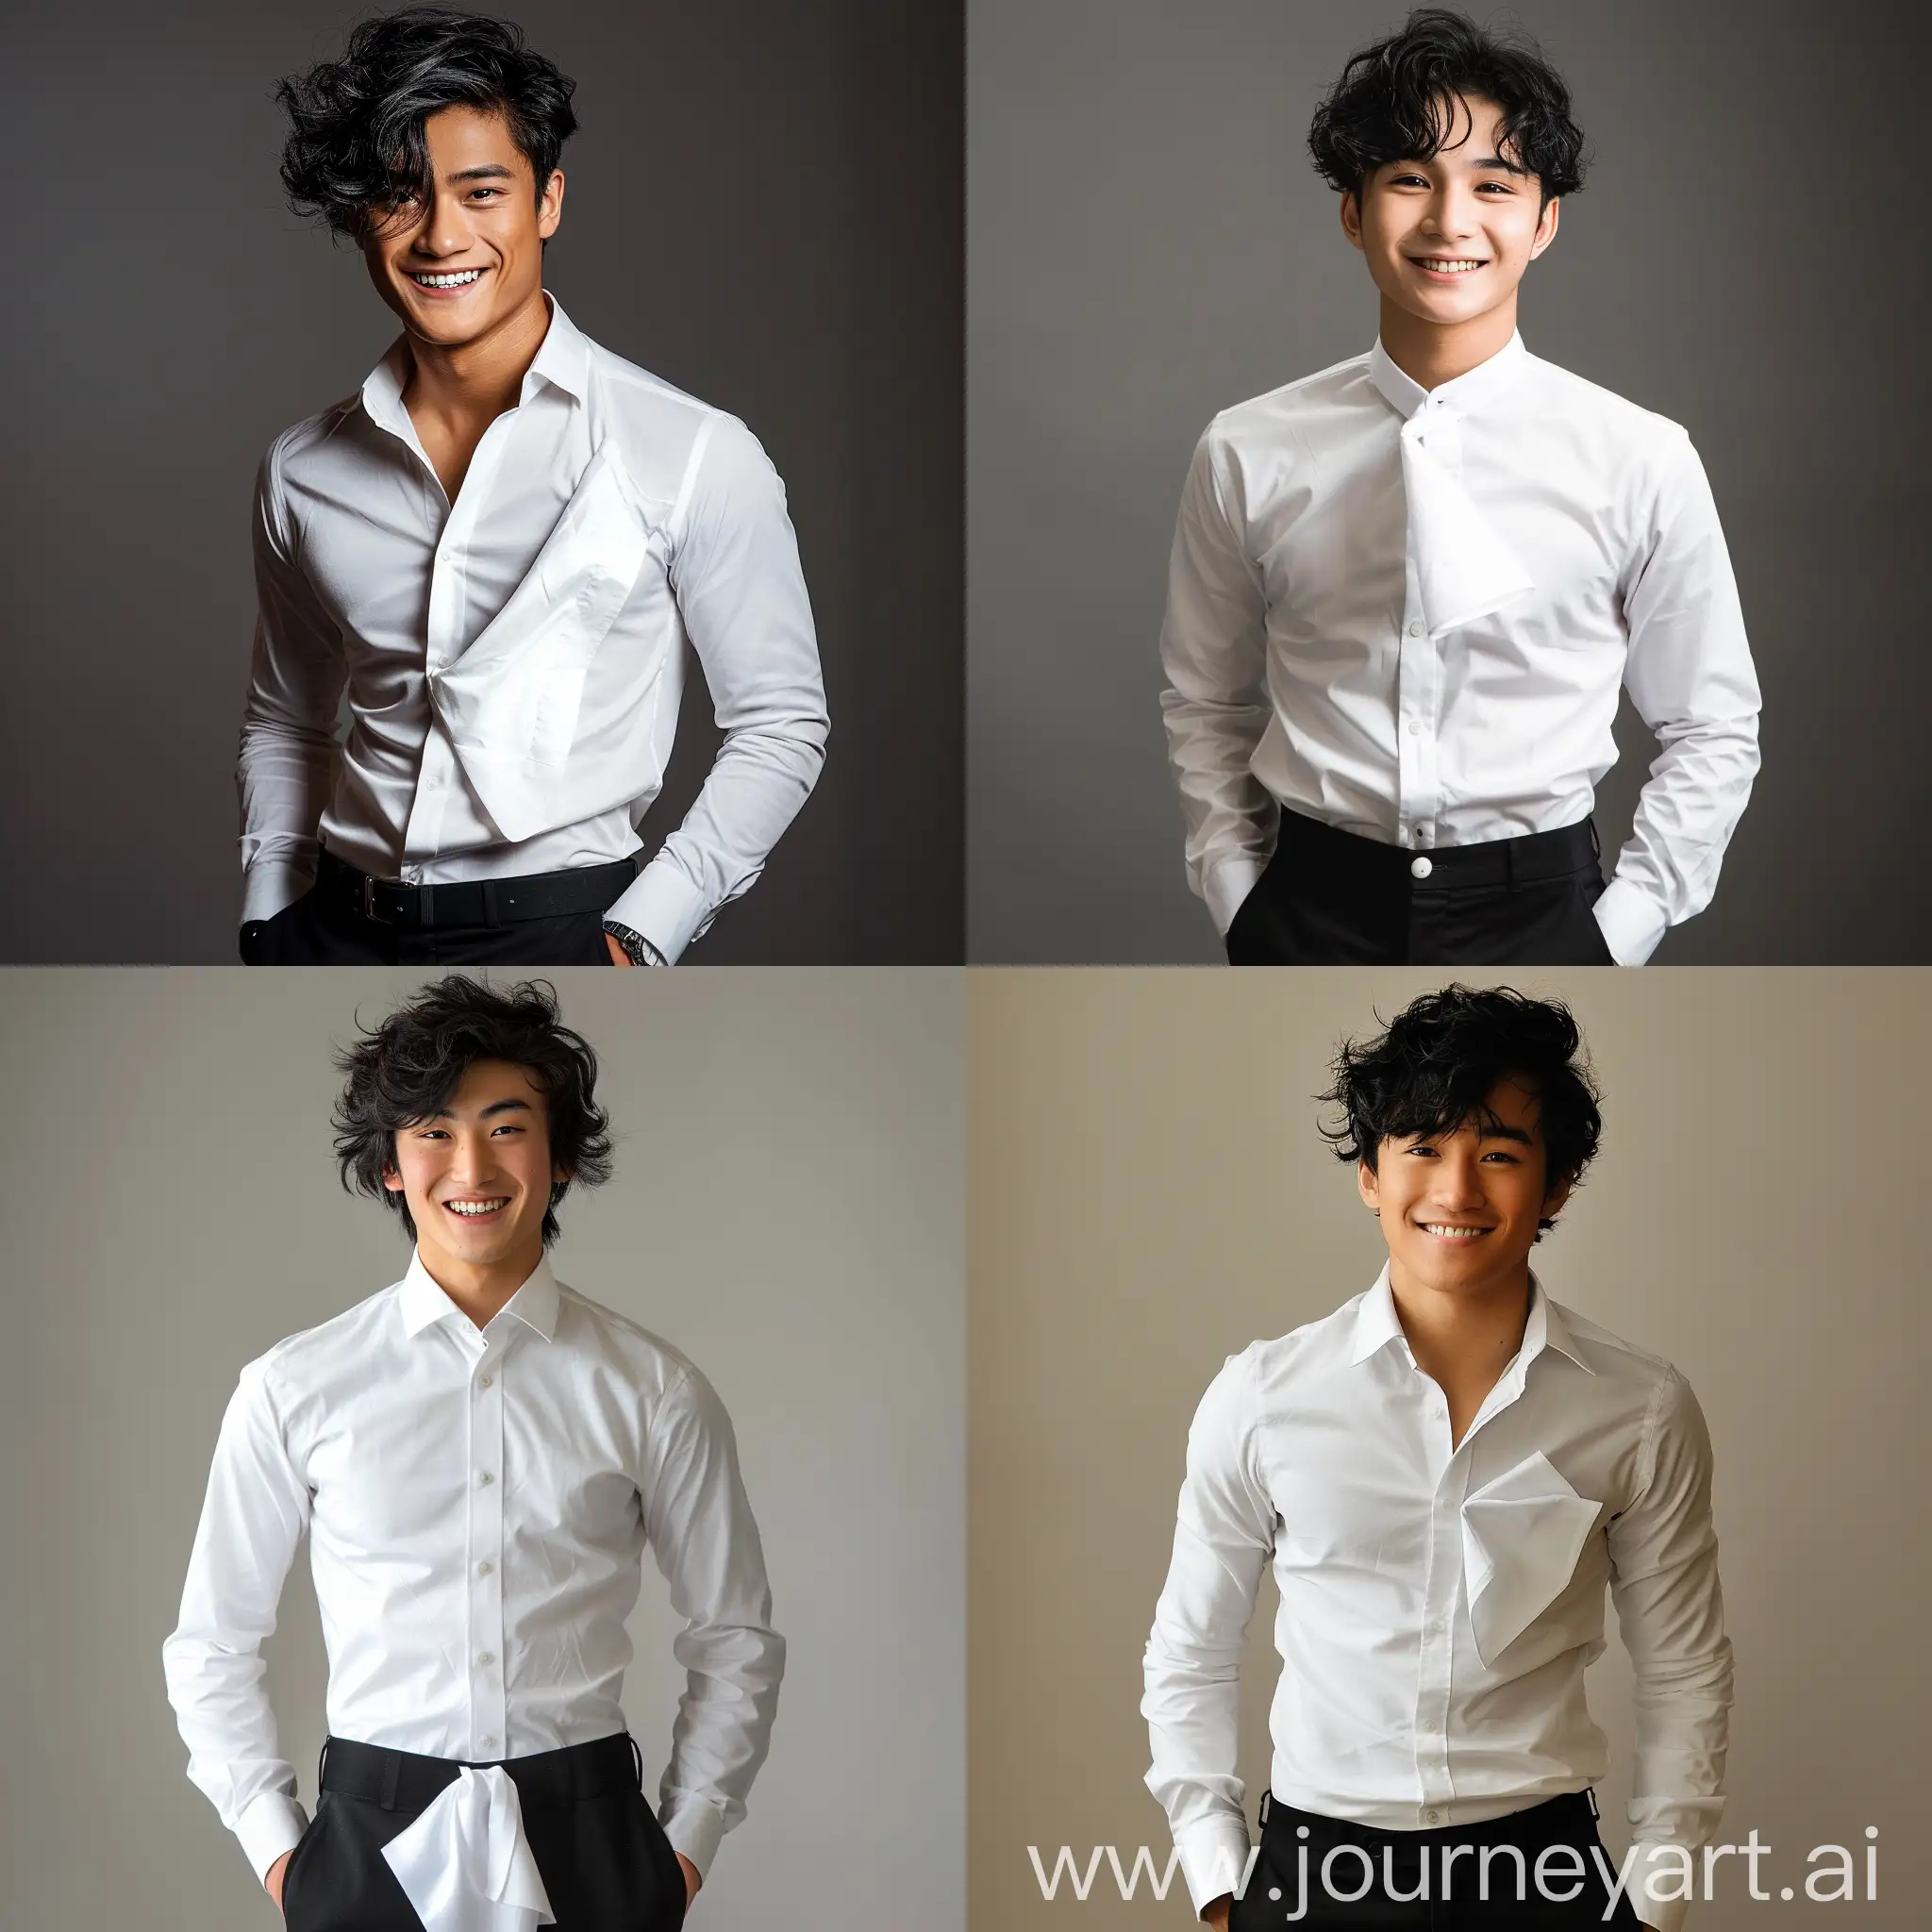 Tall 20 year old male, black hair, wavy hair, handsome, modest dressing, slightly muscular, White shirt, Black pants, white handkerchief tucked to his pants, black pupils, smiling, innocent looking